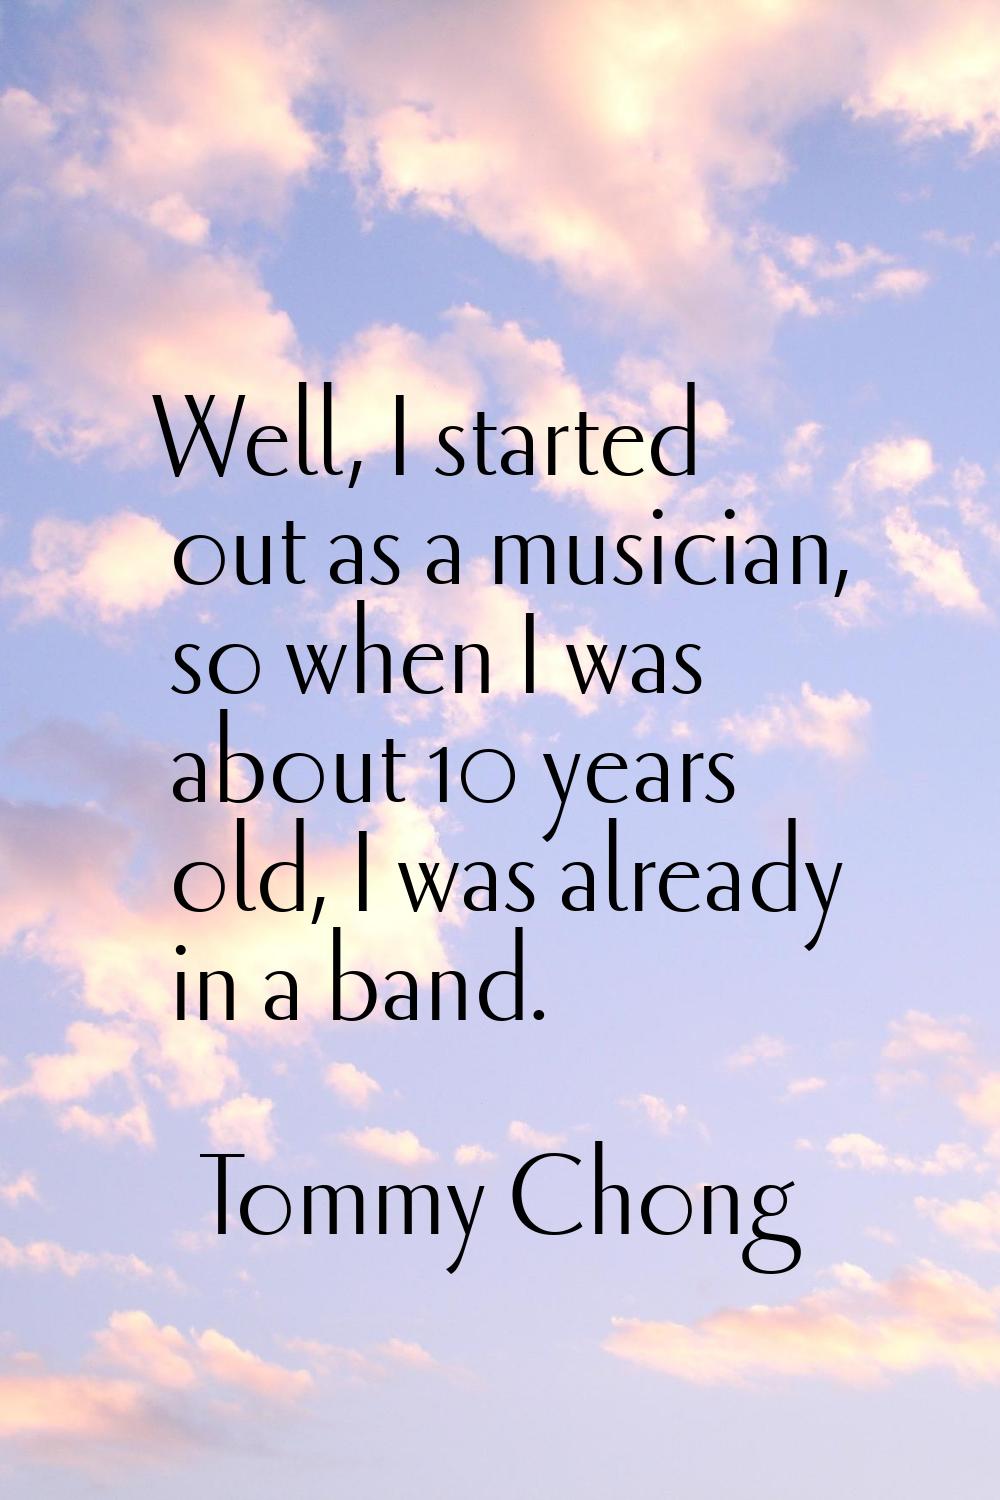 Well, I started out as a musician, so when I was about 10 years old, I was already in a band.